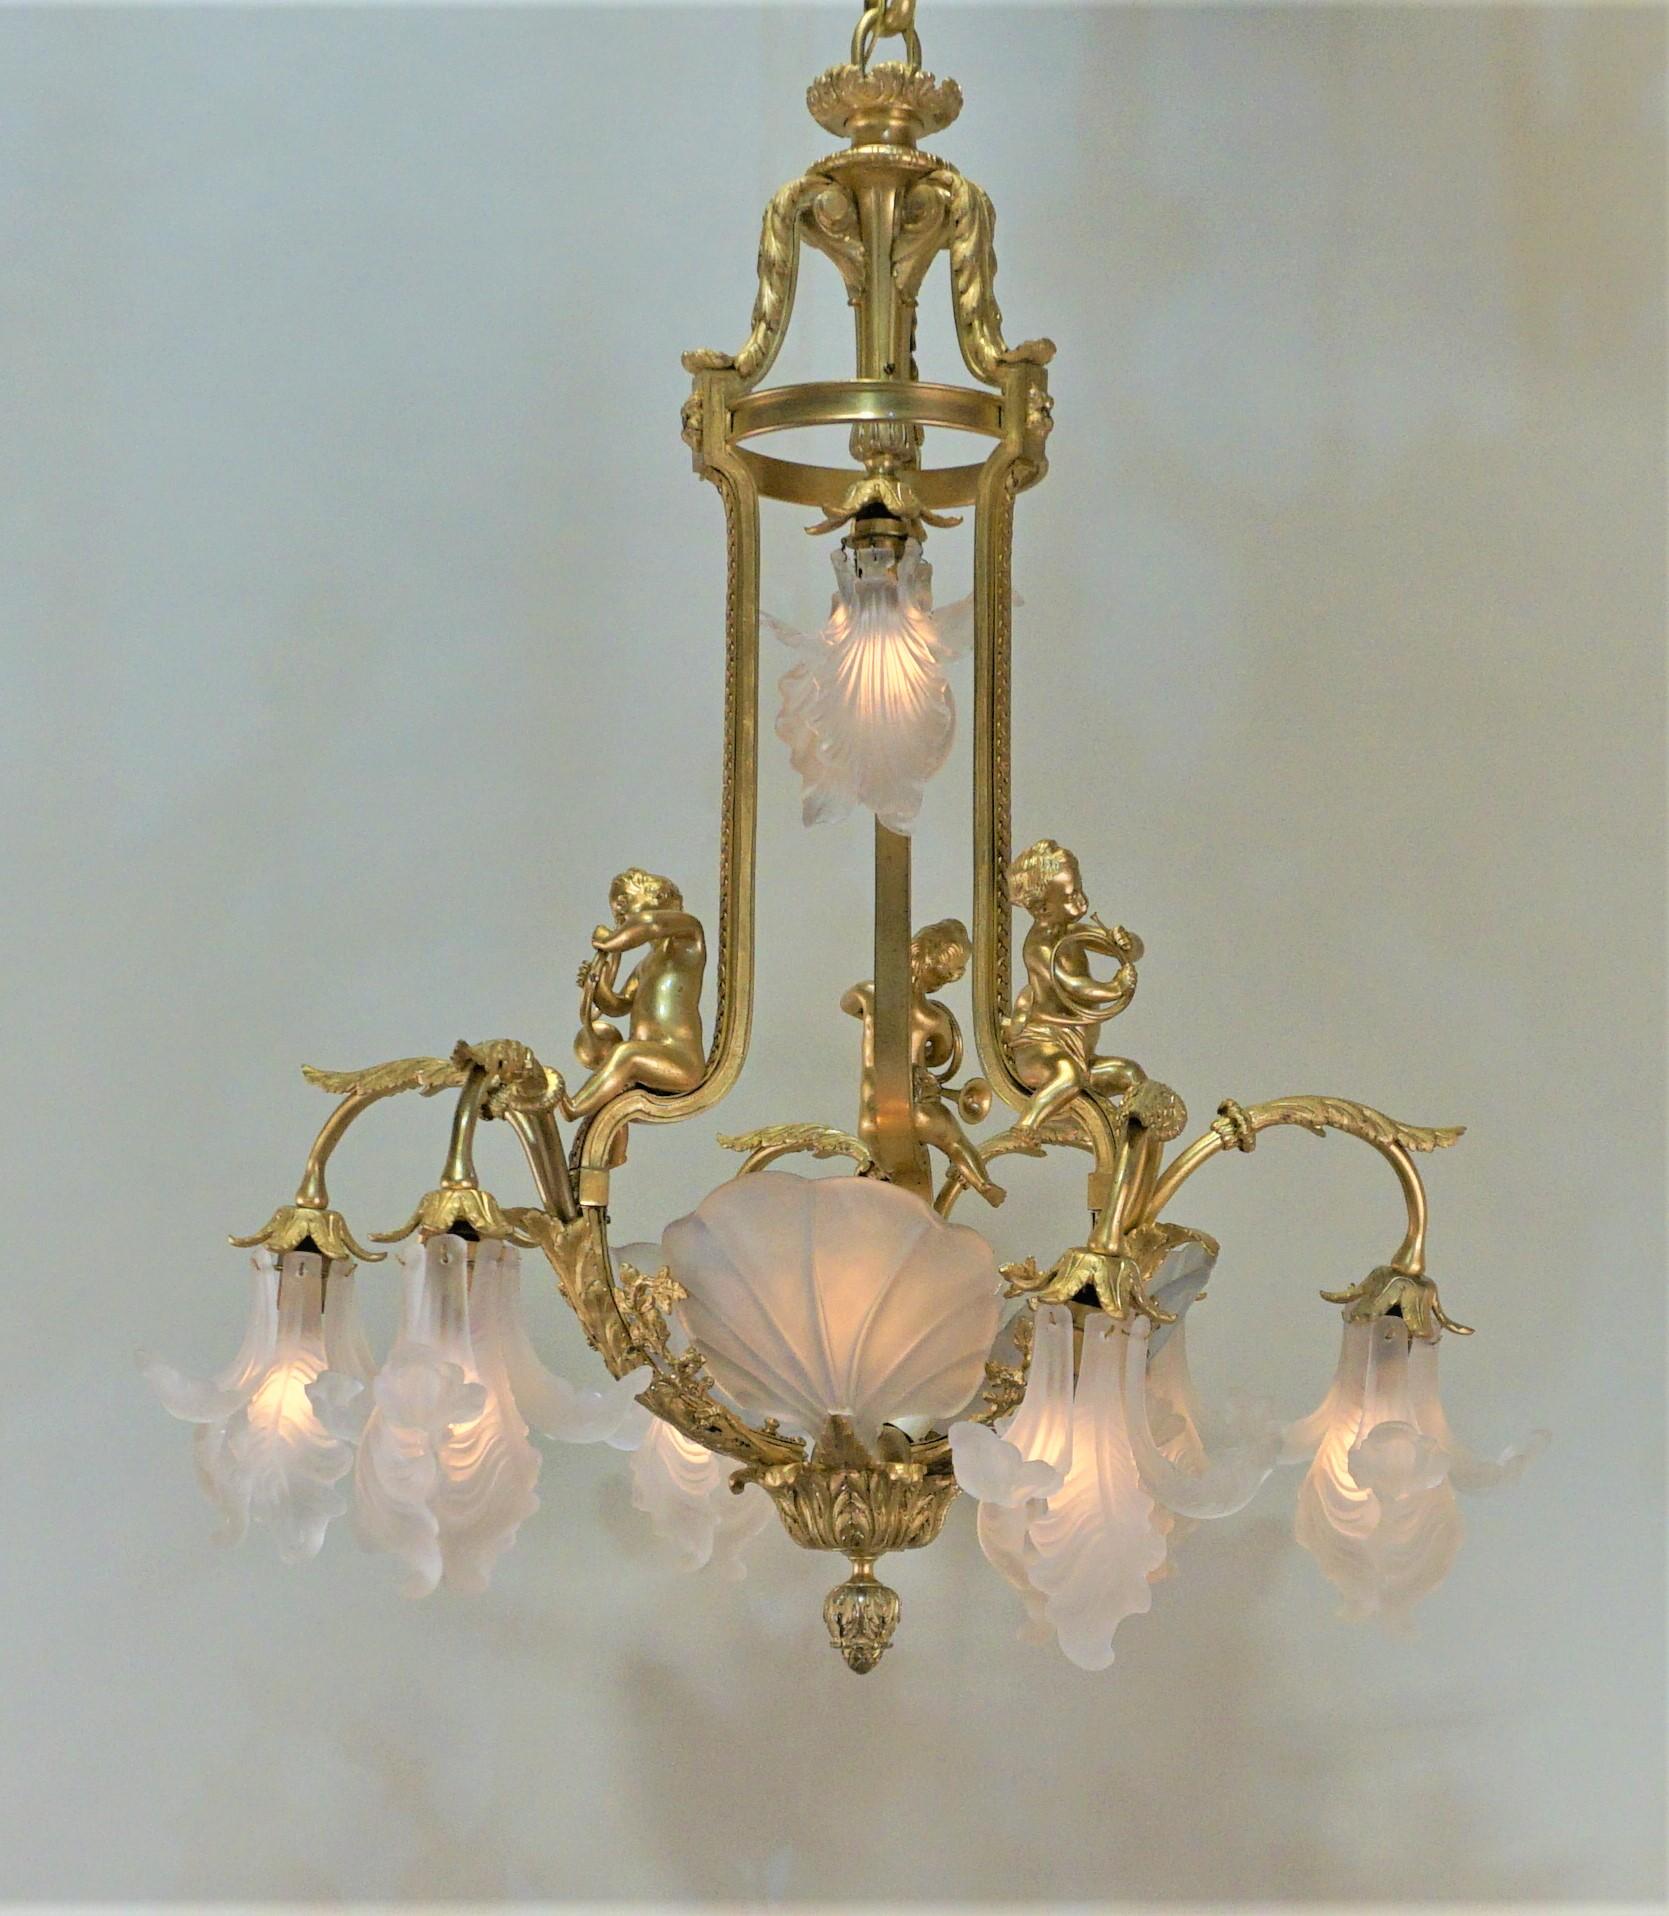 Important French Gilt Bronze Chandelier, Early 20th Century by E. Mottheau 1